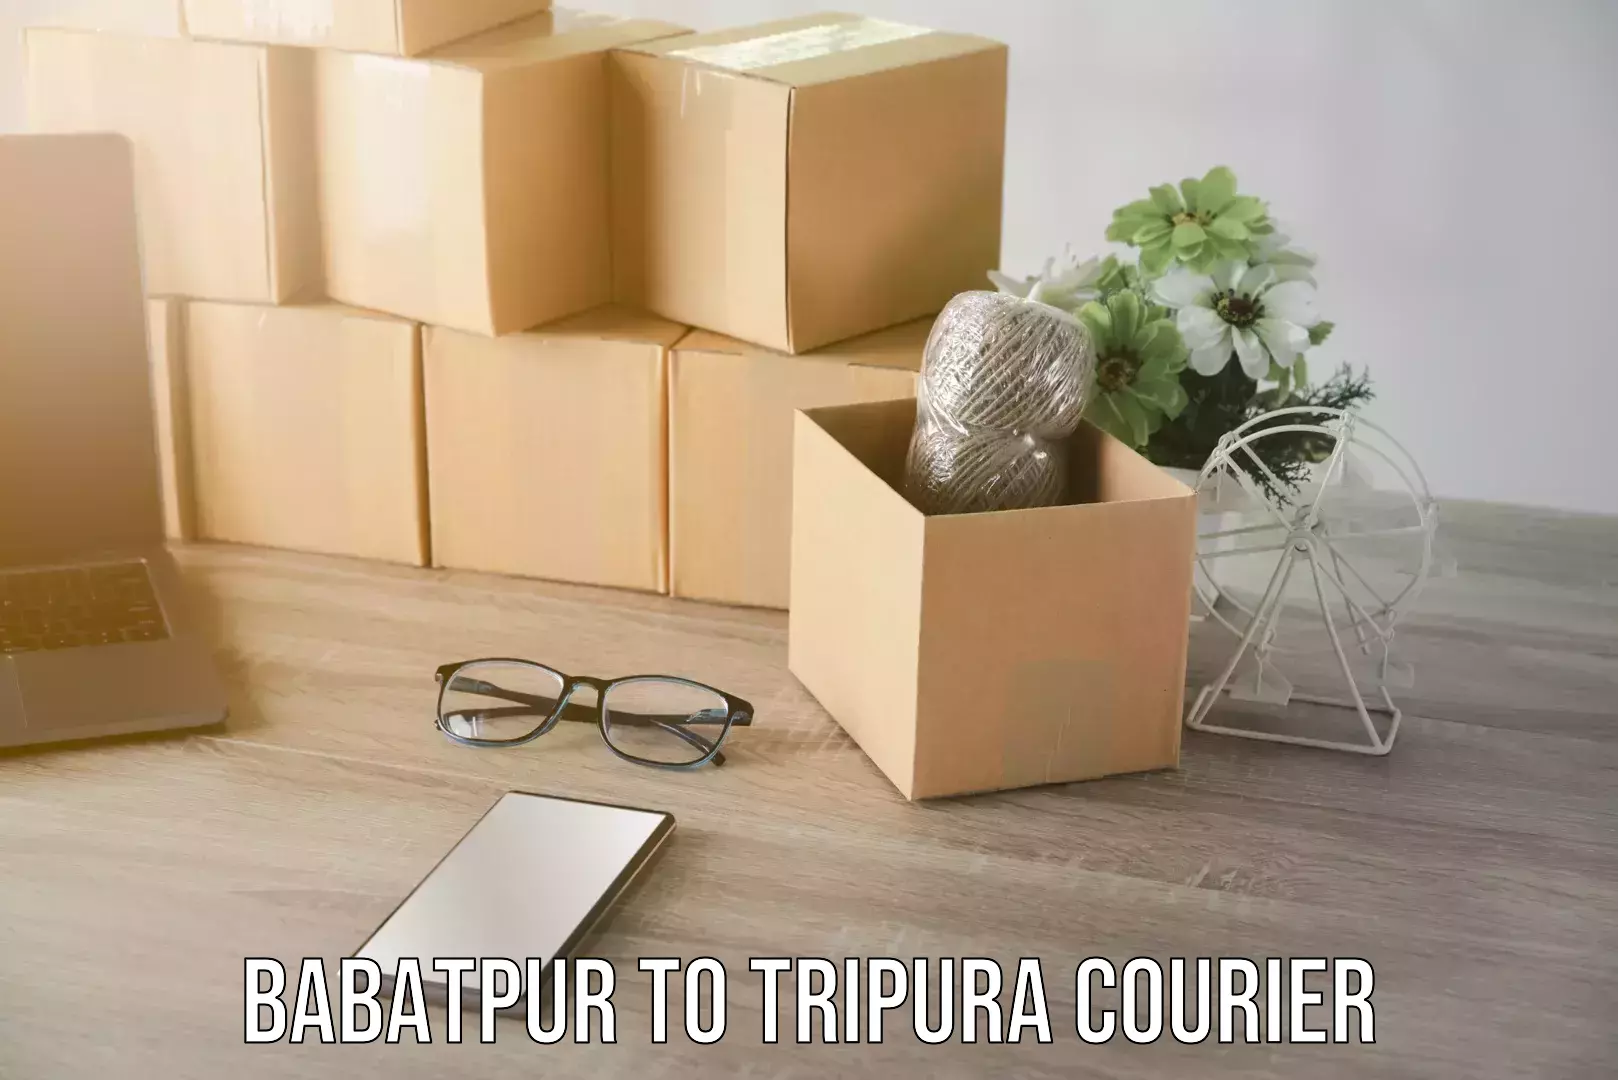 Speedy delivery service Babatpur to Tripura